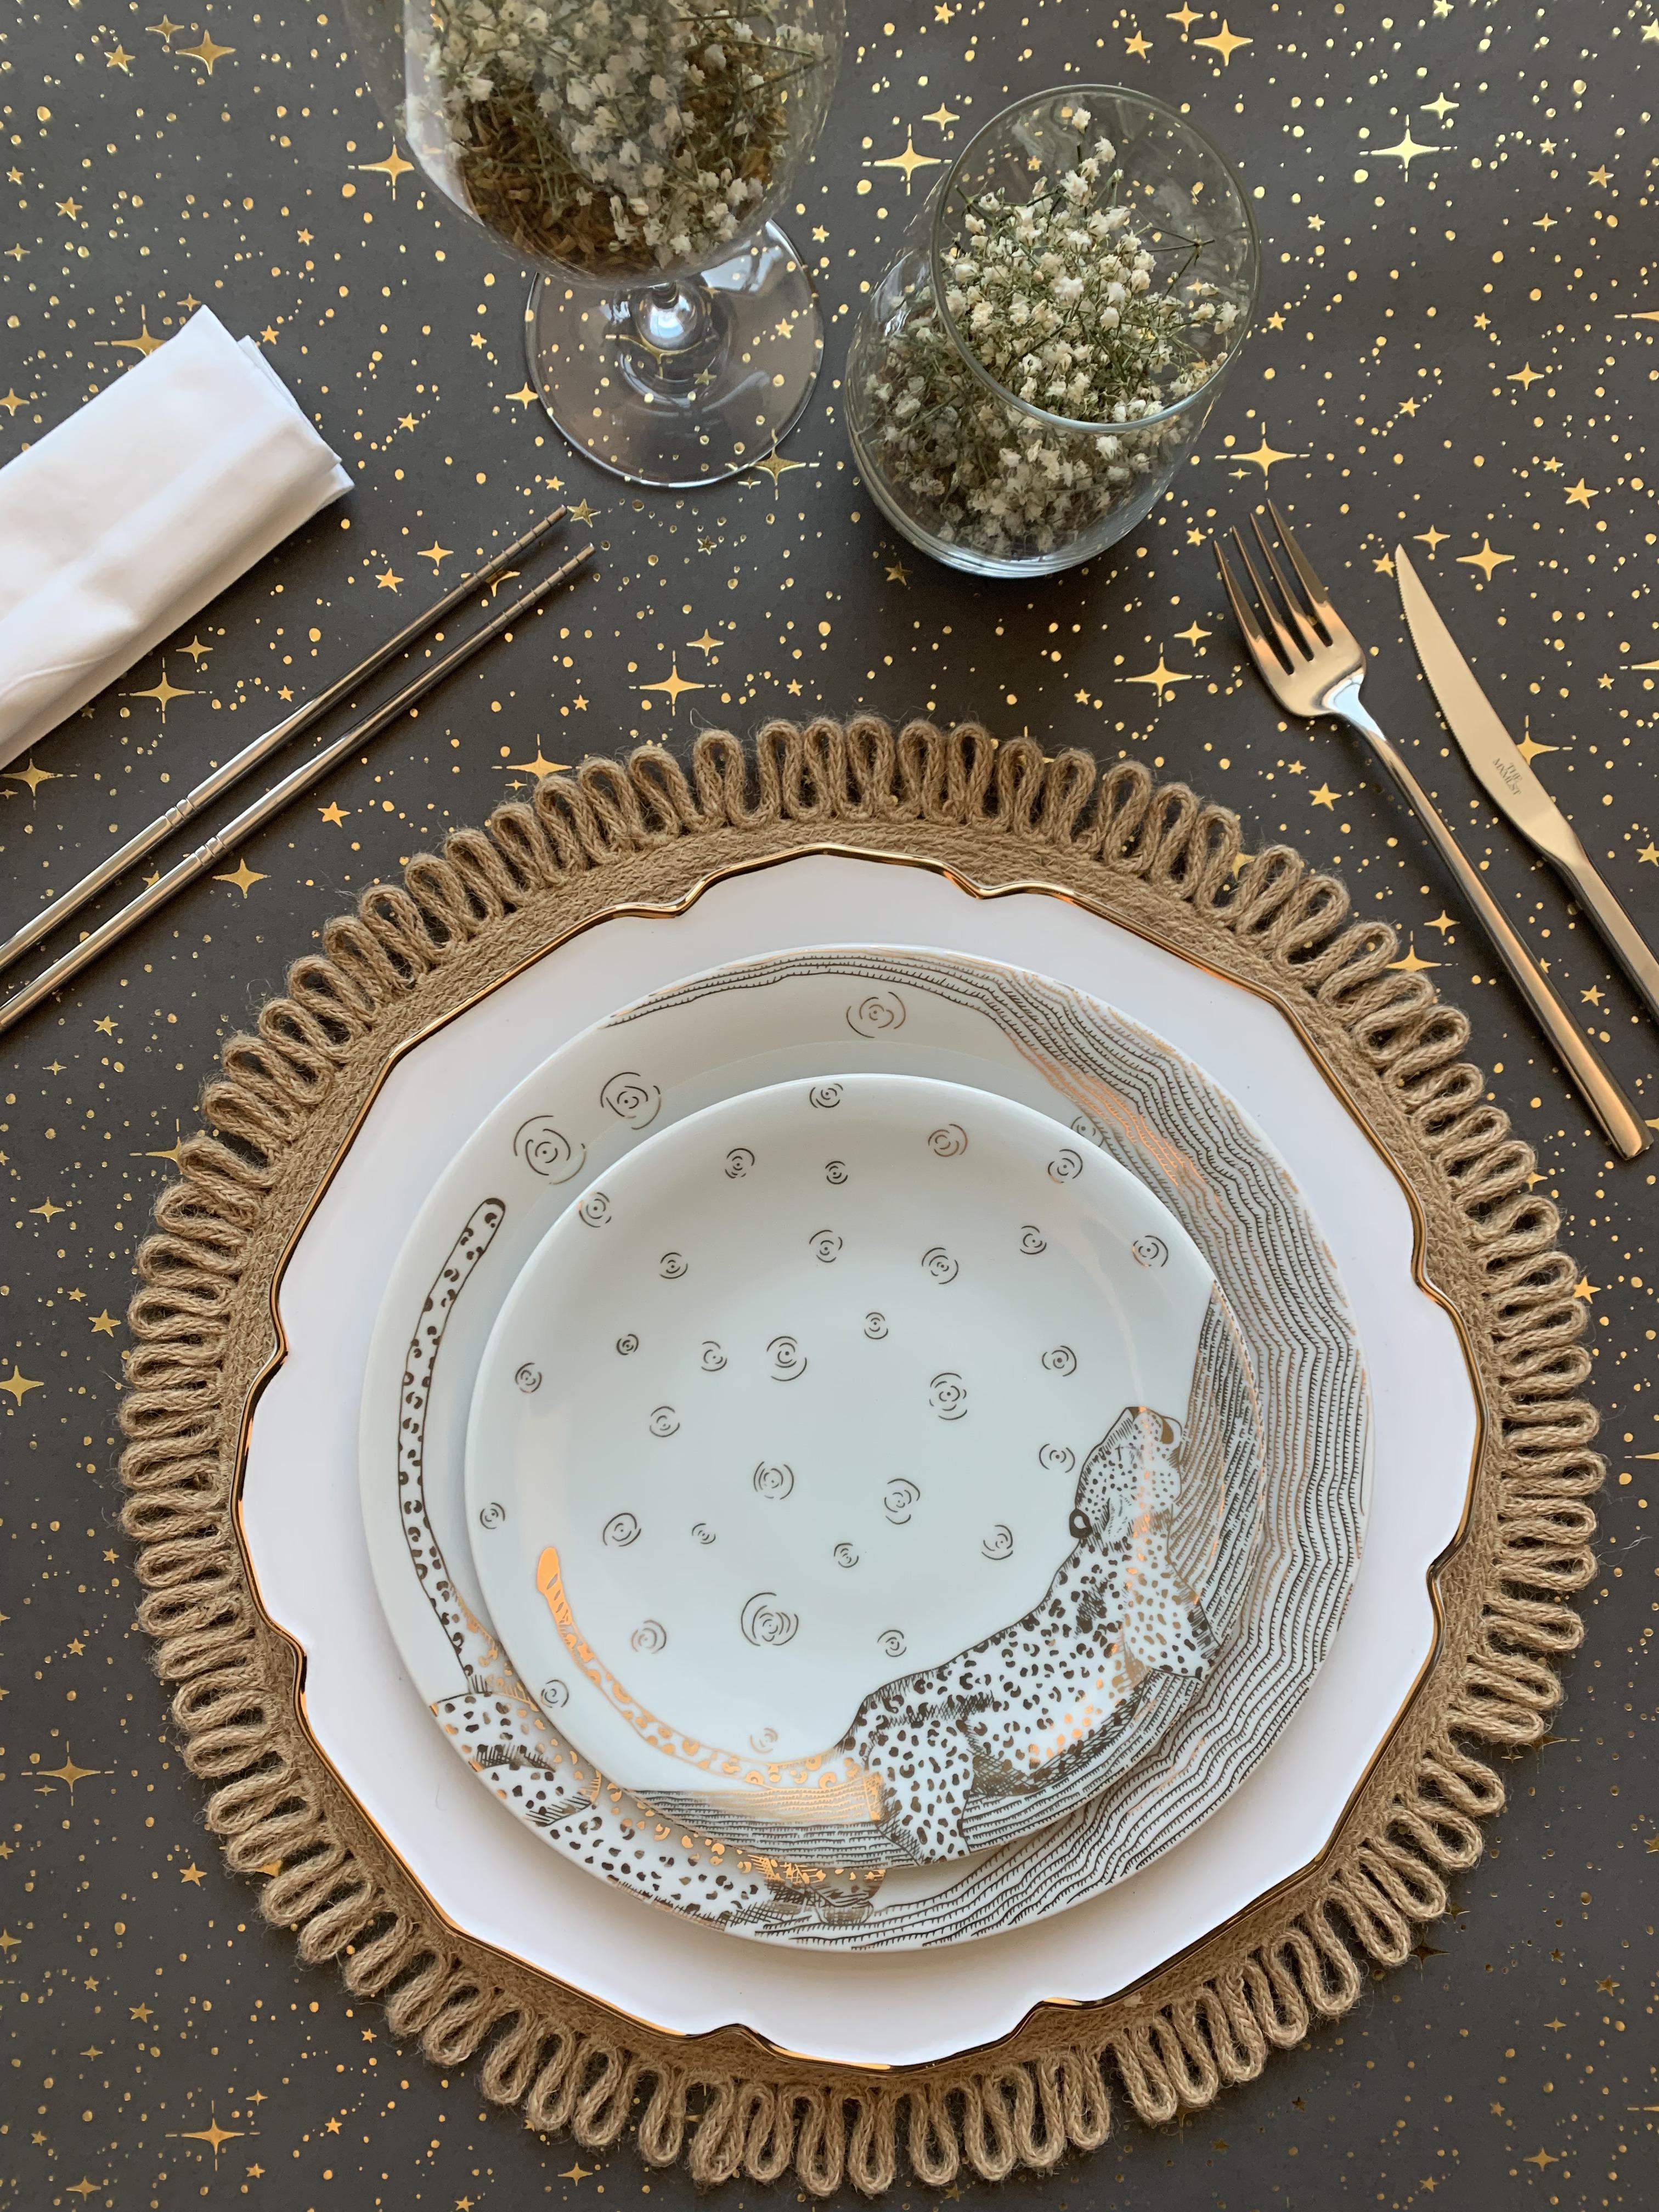 The Les Navas dinner set features a hand-painted guilded leopard in 12k Gold under the night sky. The activities of this great animal are showcased in the motif of this set. Playful, chic and dynamic- this dinner set will shine on your dinner table.